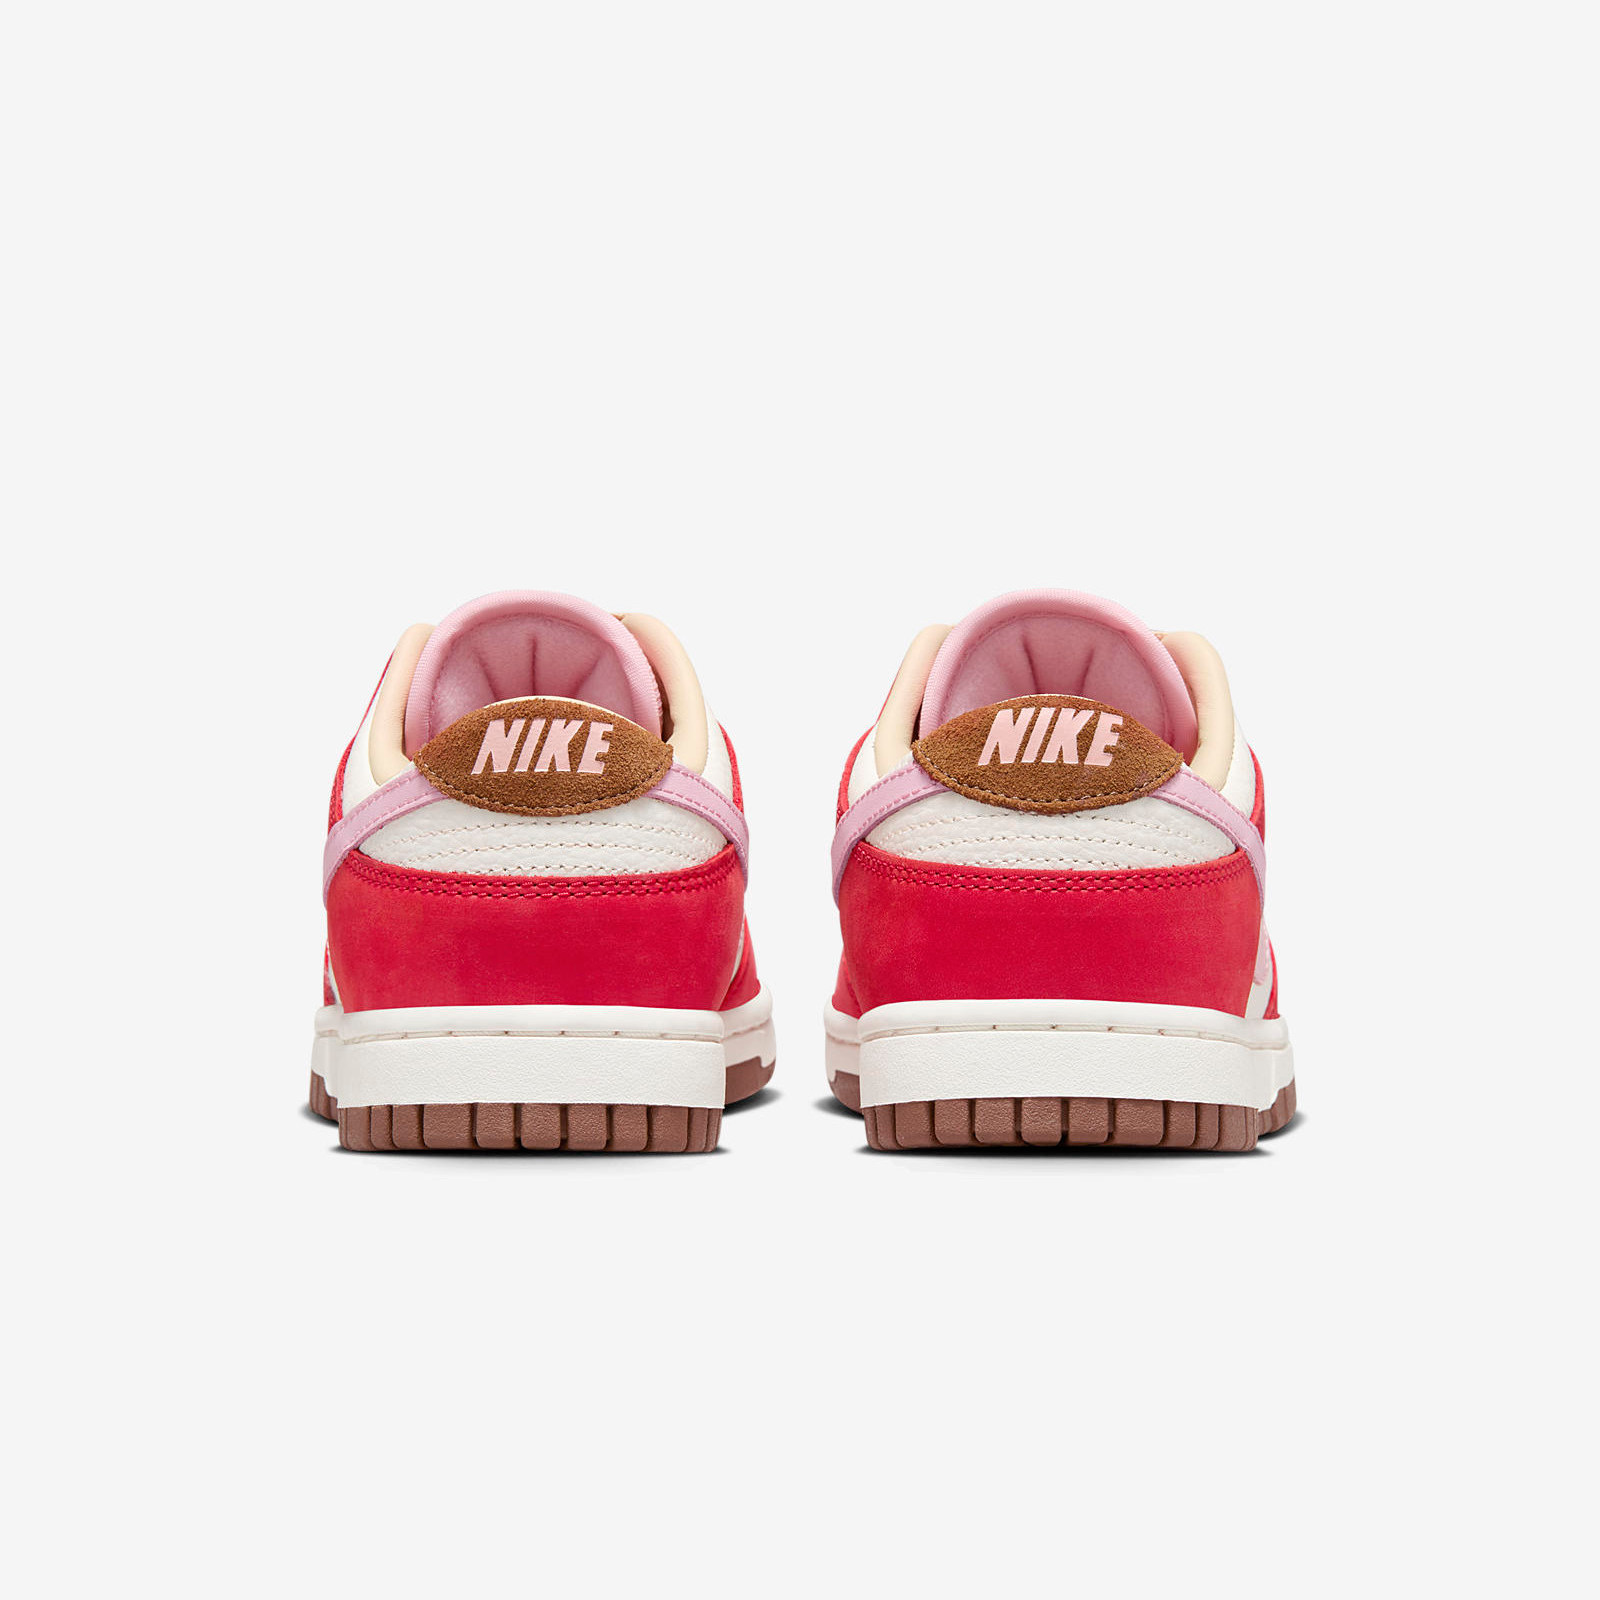 Nike Dunk Low
Sail / Sport Red